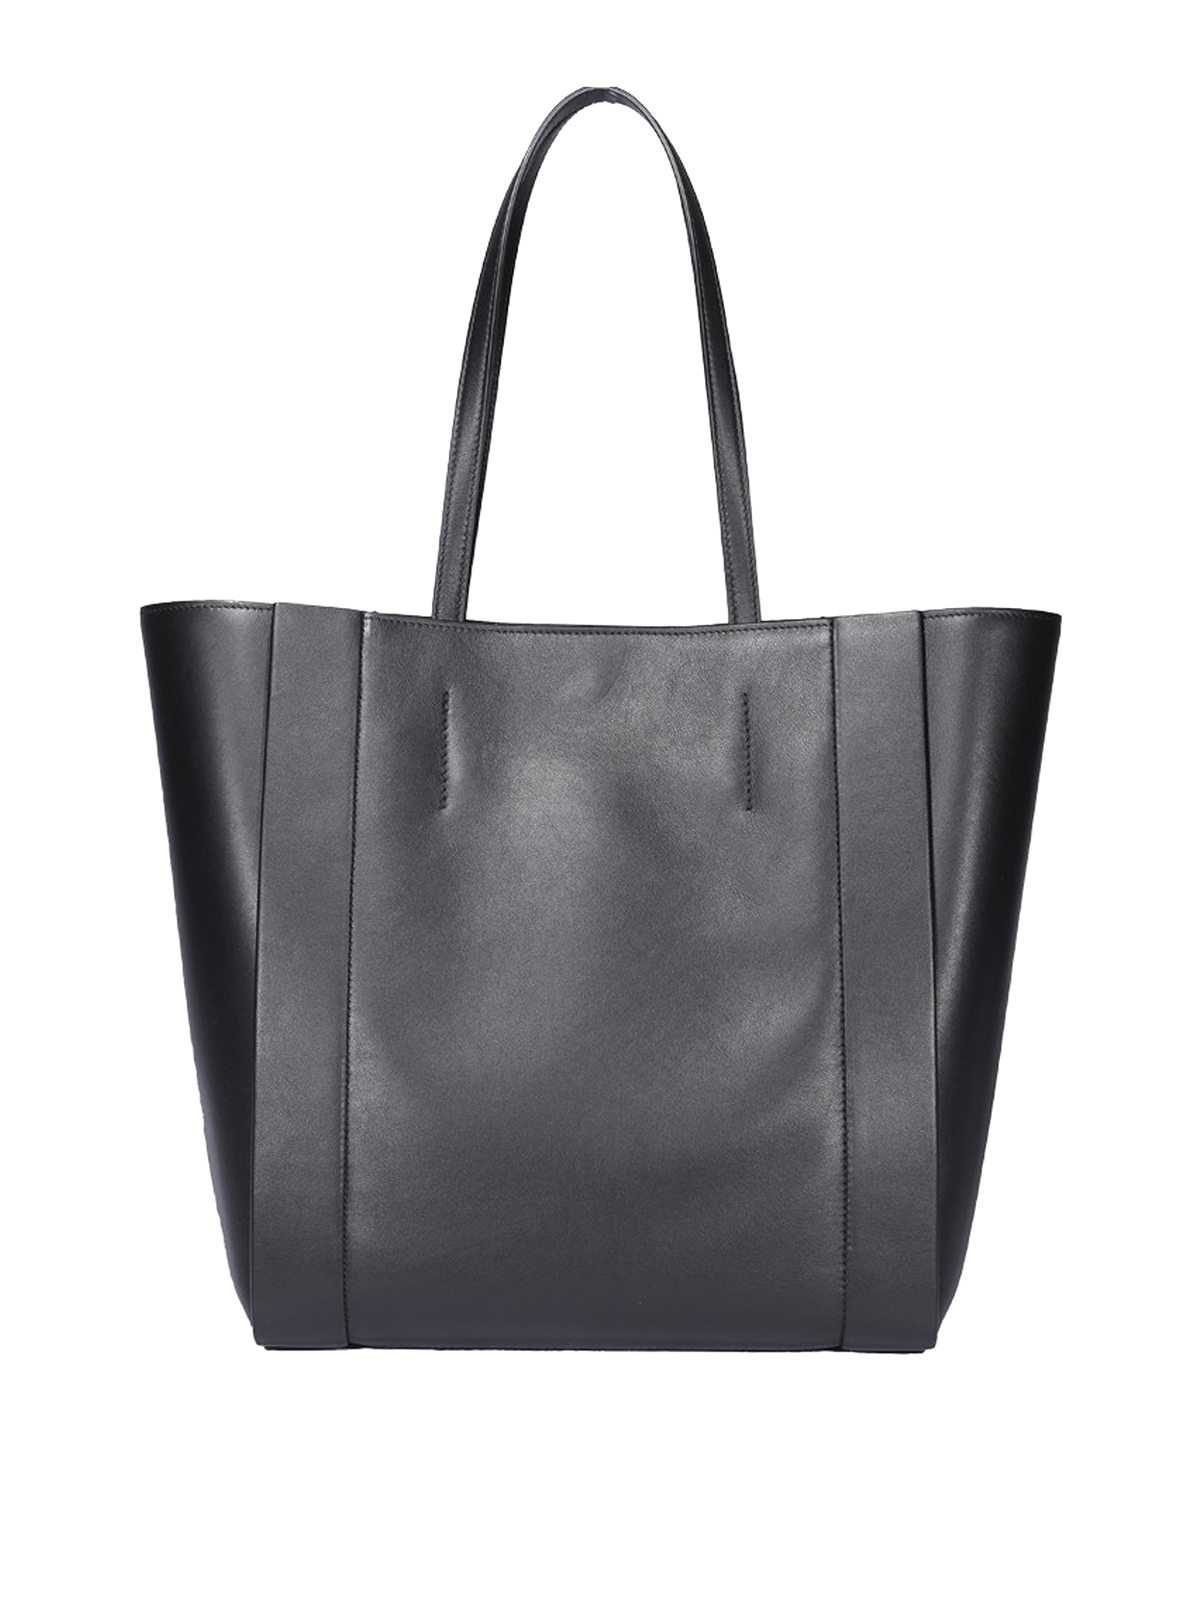 Totes bags Alexander Mcqueen - Leather tote - 6536561X3G31000 | iKRIX.com